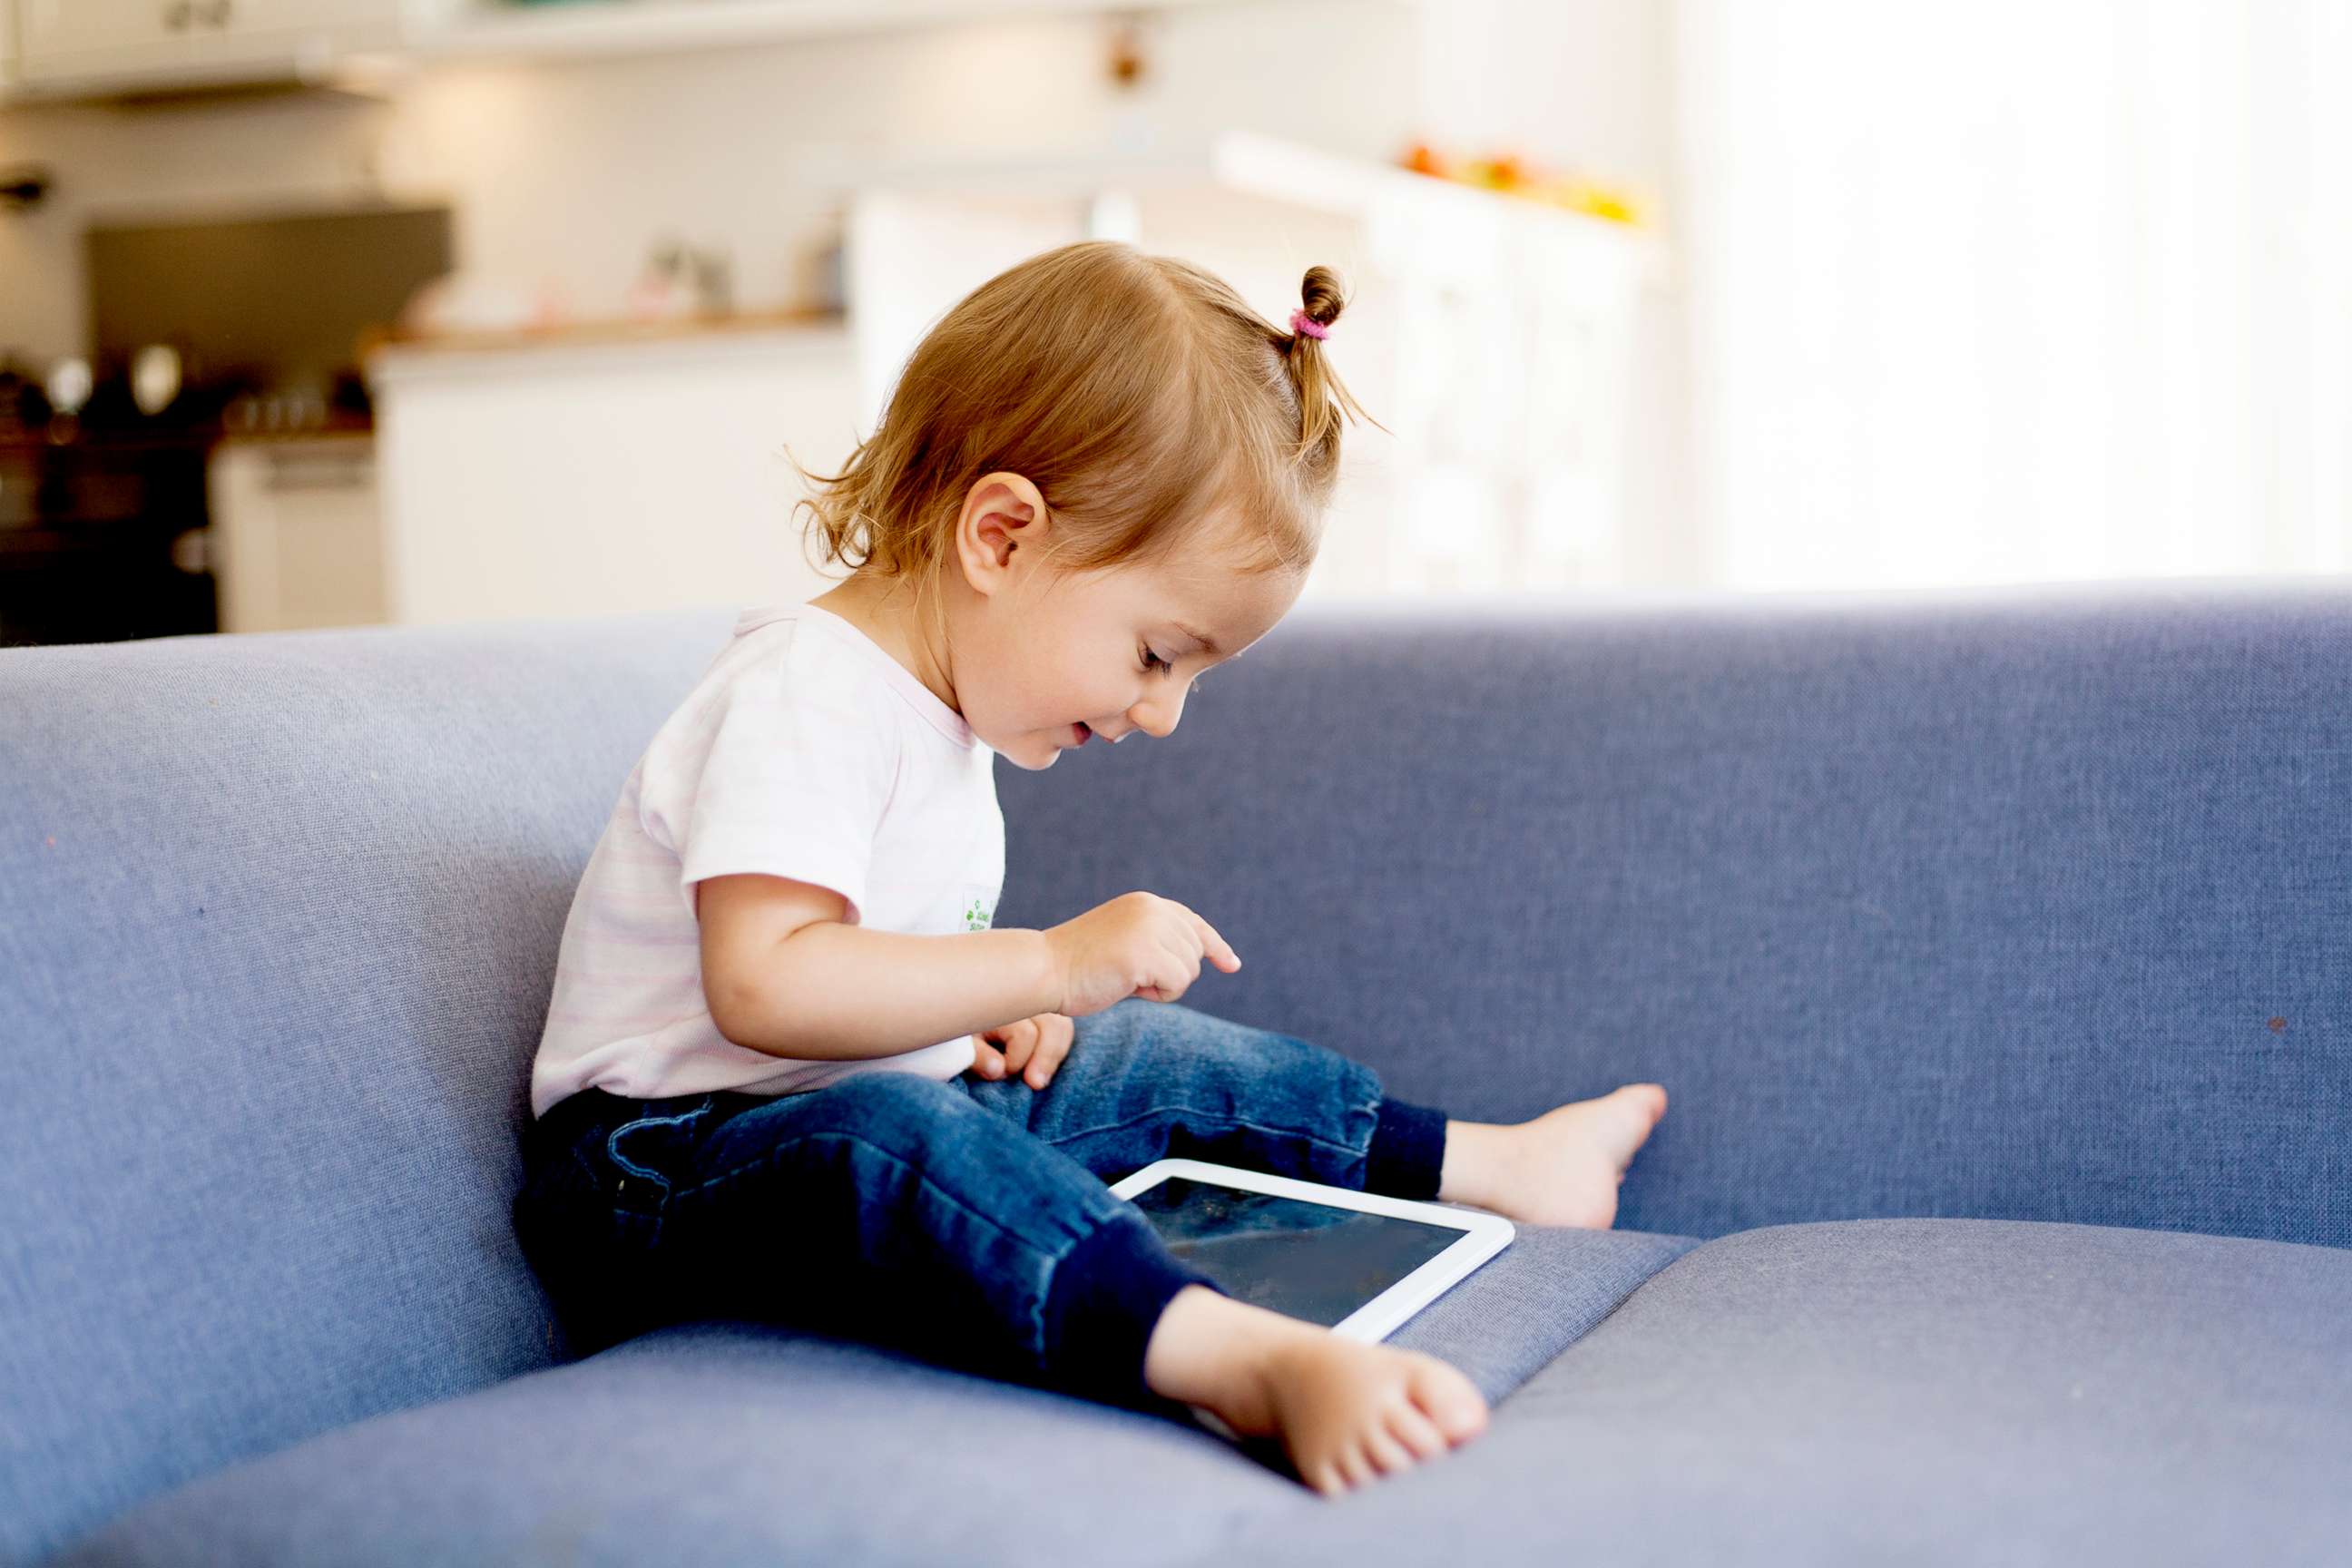 PHOTO: A young girl uses a tablet in an undated stock photo.